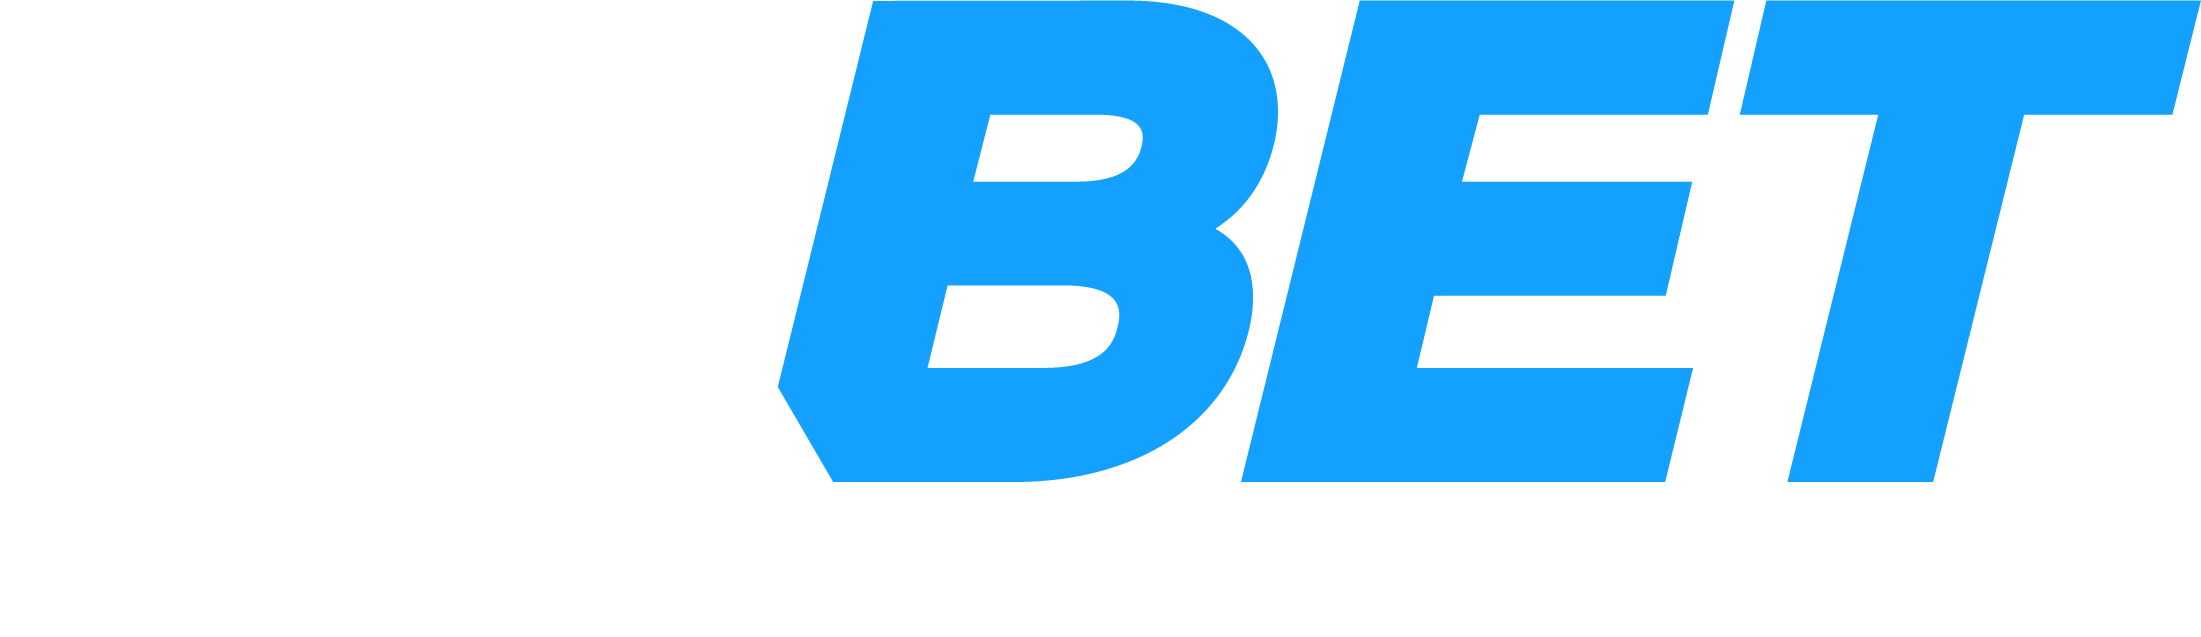 LINK TO 1XBET